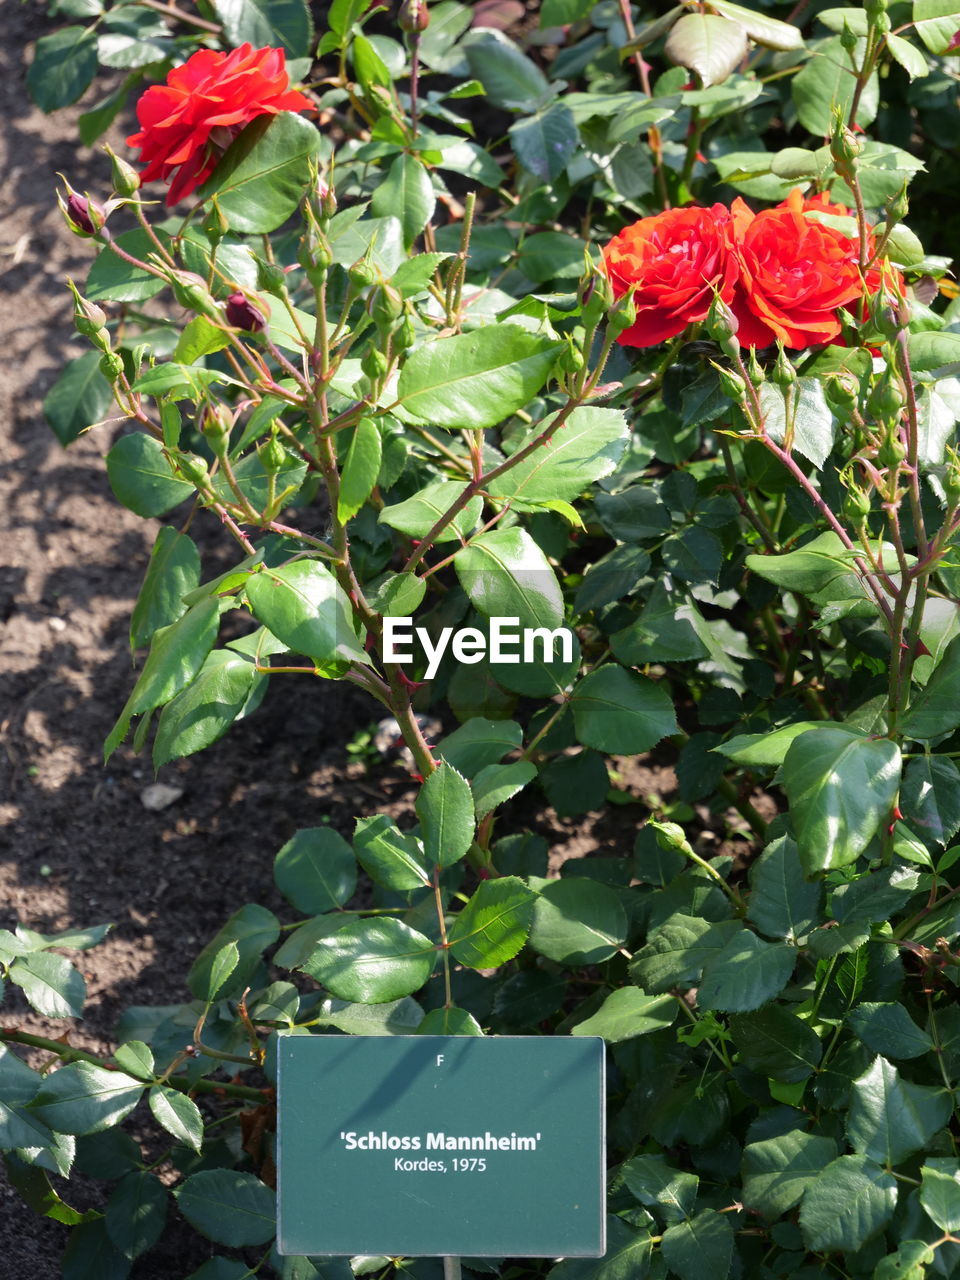 CLOSE-UP OF RED FLOWERING PLANT WITH TEXT ON PLANTS